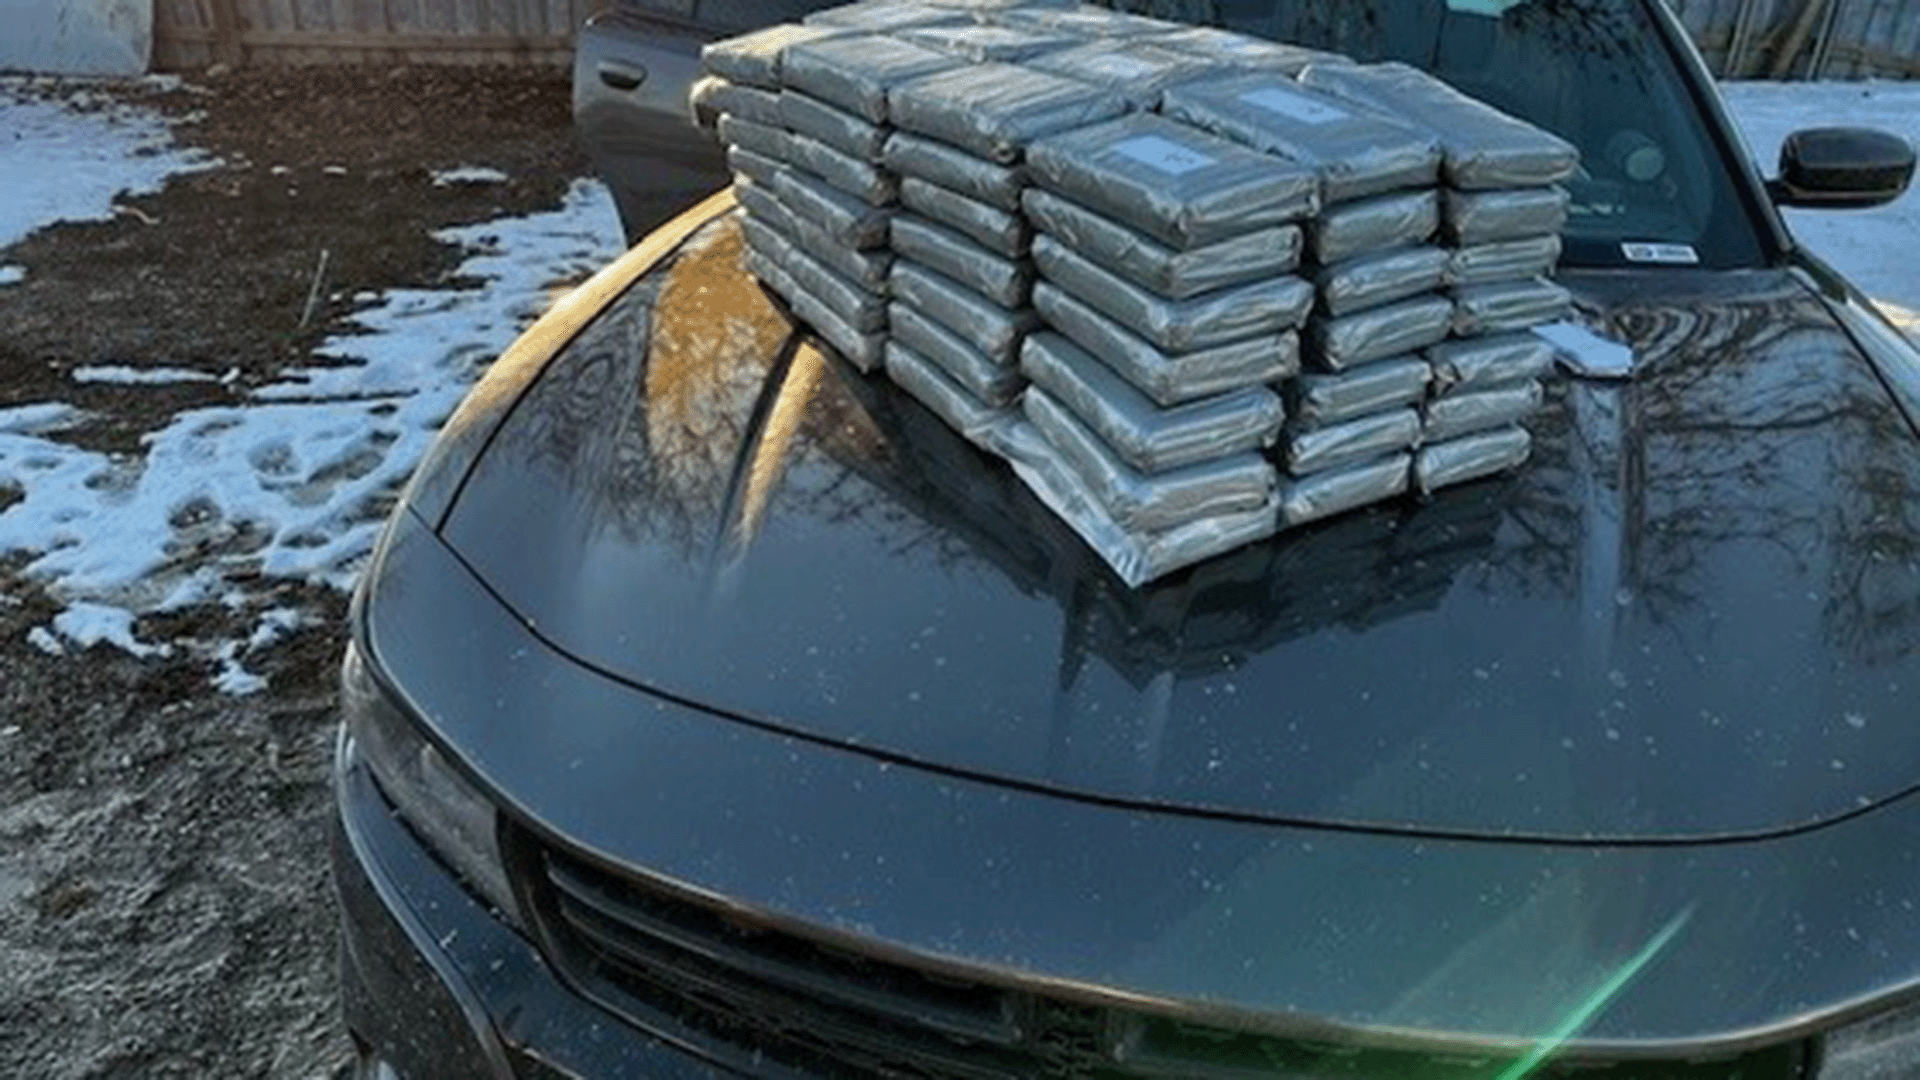 Two jailed after state trooper finds 184 pounds of cocaine during traffic stop